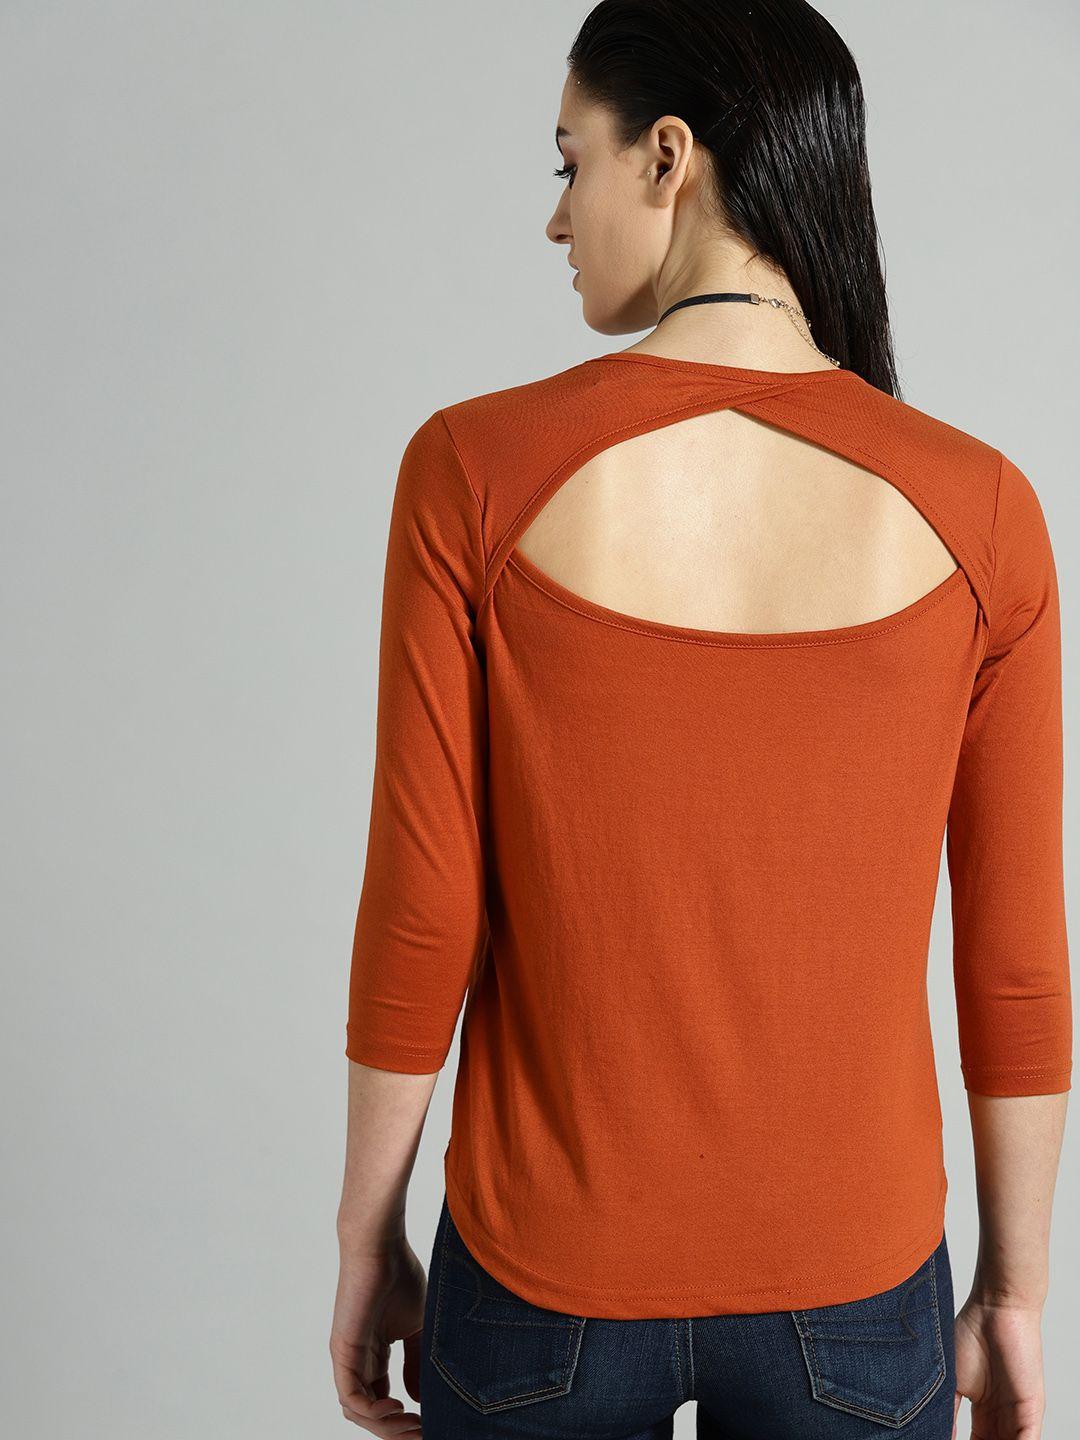 the roadster lifestyle co women rust orange solid styled back top